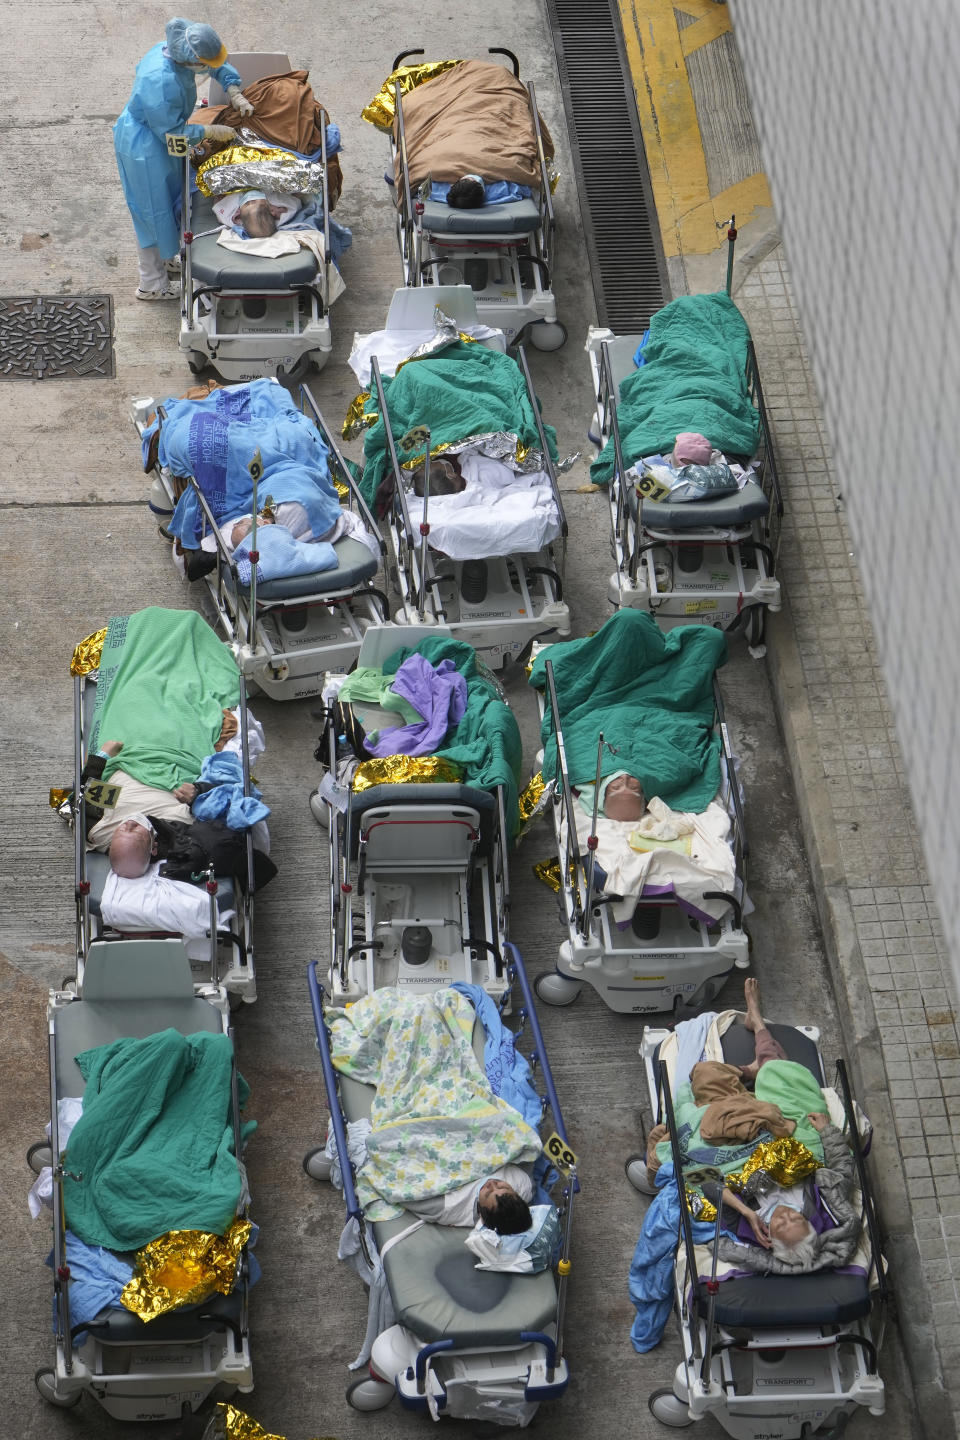 Patients lie on hospital beds as they wait at a temporary holding area outside Caritas Medical Centre in Hong Kong Wednesday, Feb.16, 2022. There was visible evidence that Hong Kong hospitals were becoming overwhelmed by the latest COVID surge, with patients on stretchers and in tents being seen to by medical personnel on Wednesday outside the Caritas hospital. (AP Photo Vincent Yu)